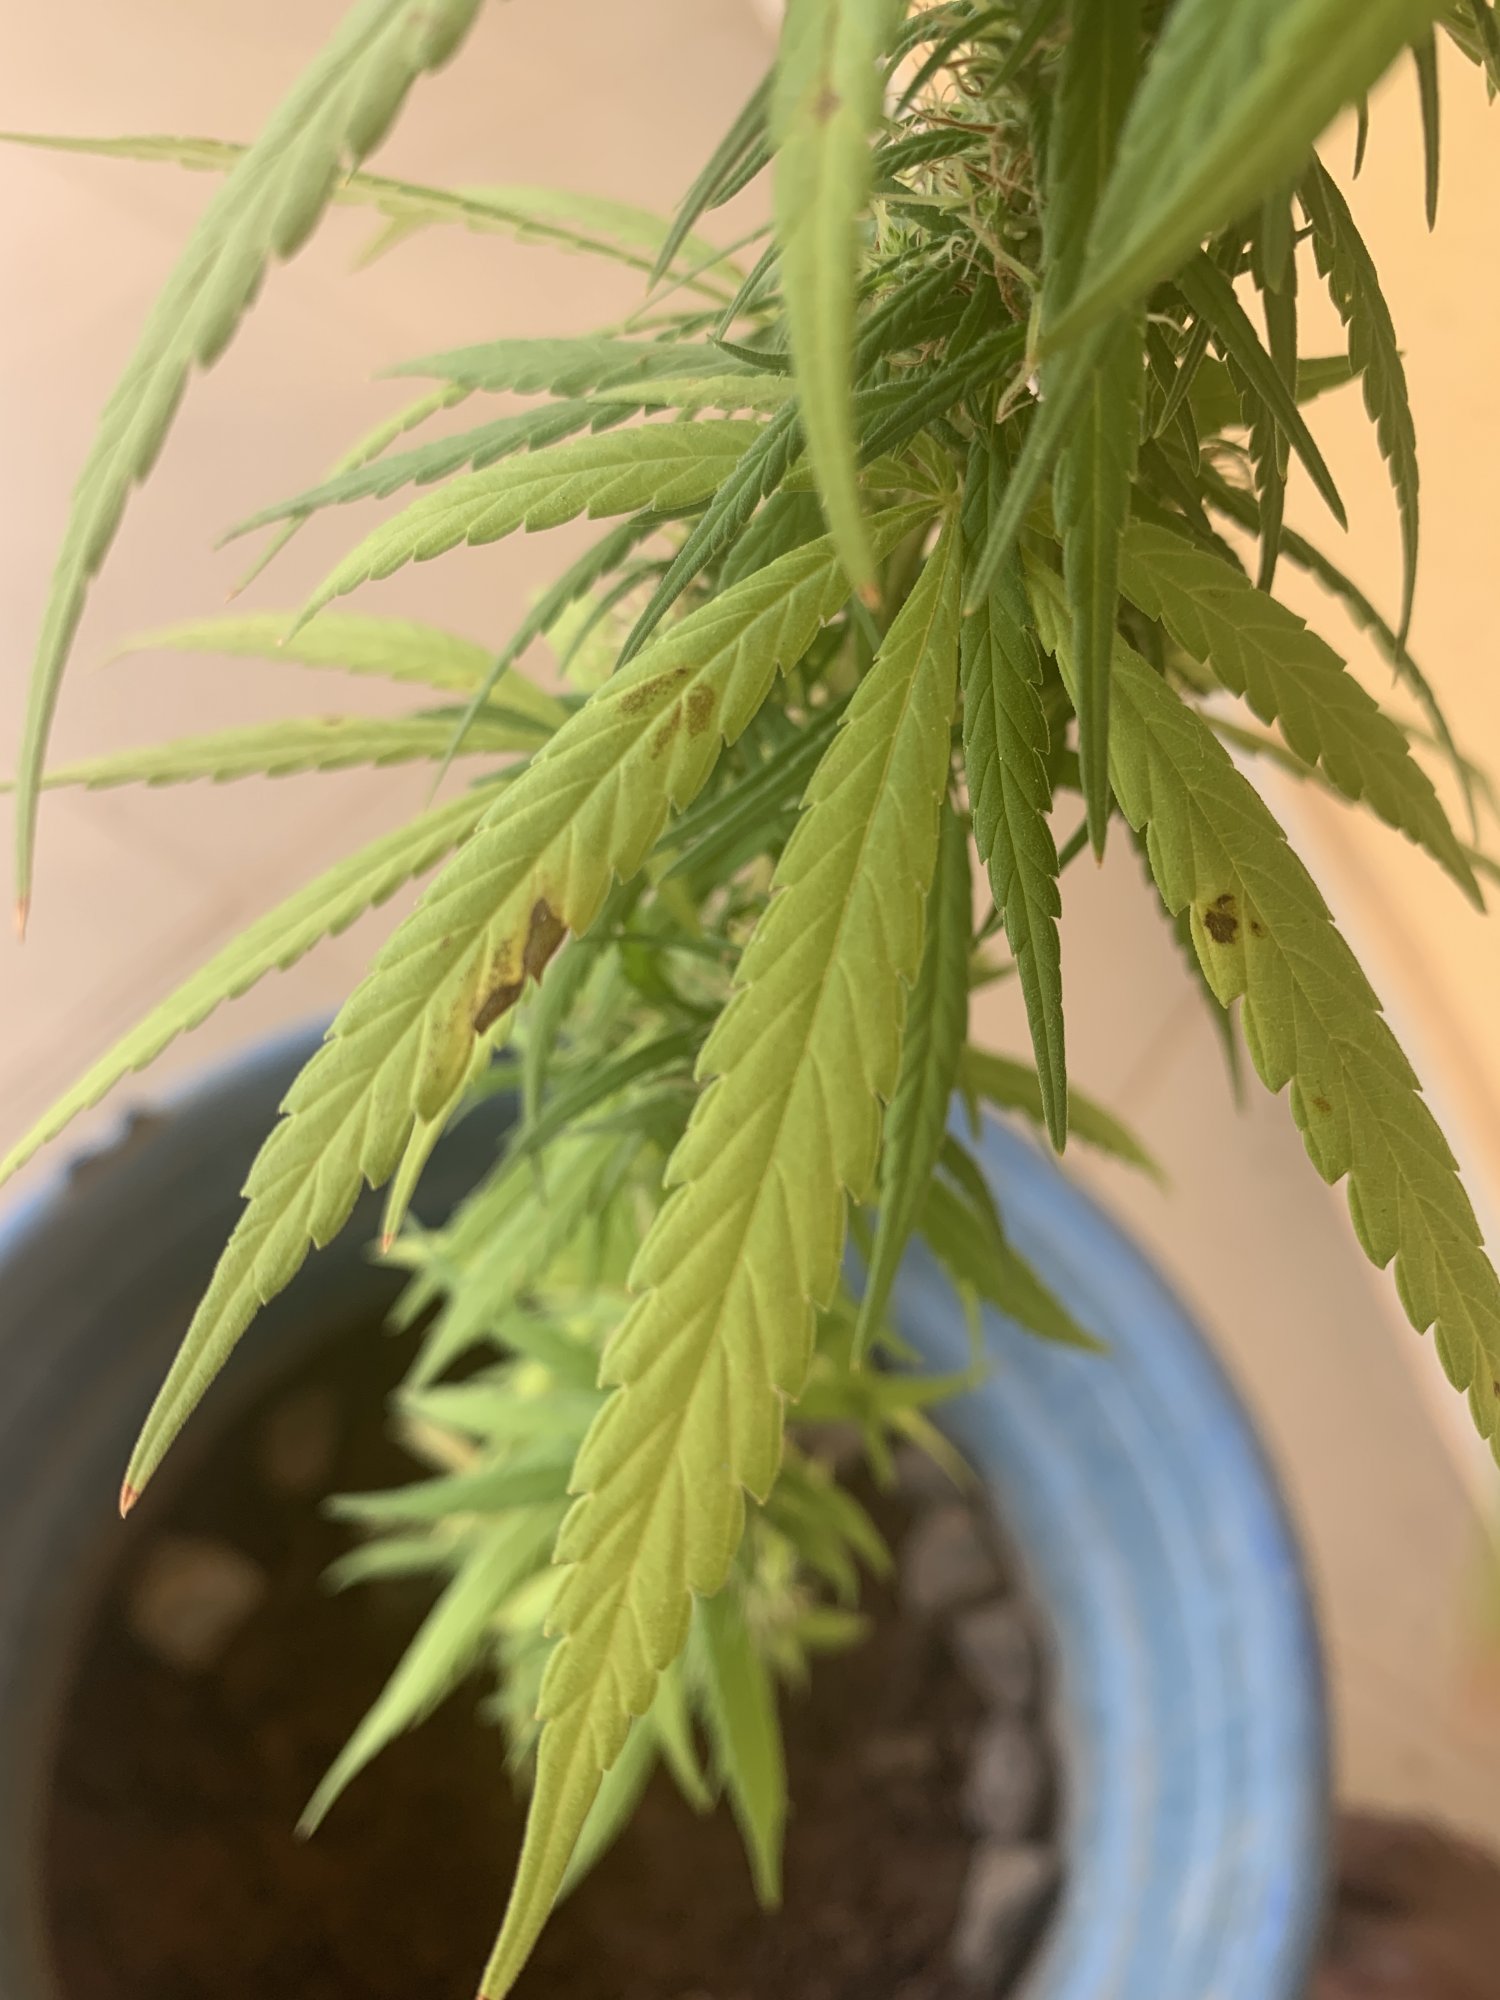 Please help i cant seem to diagnose my plant deficiency